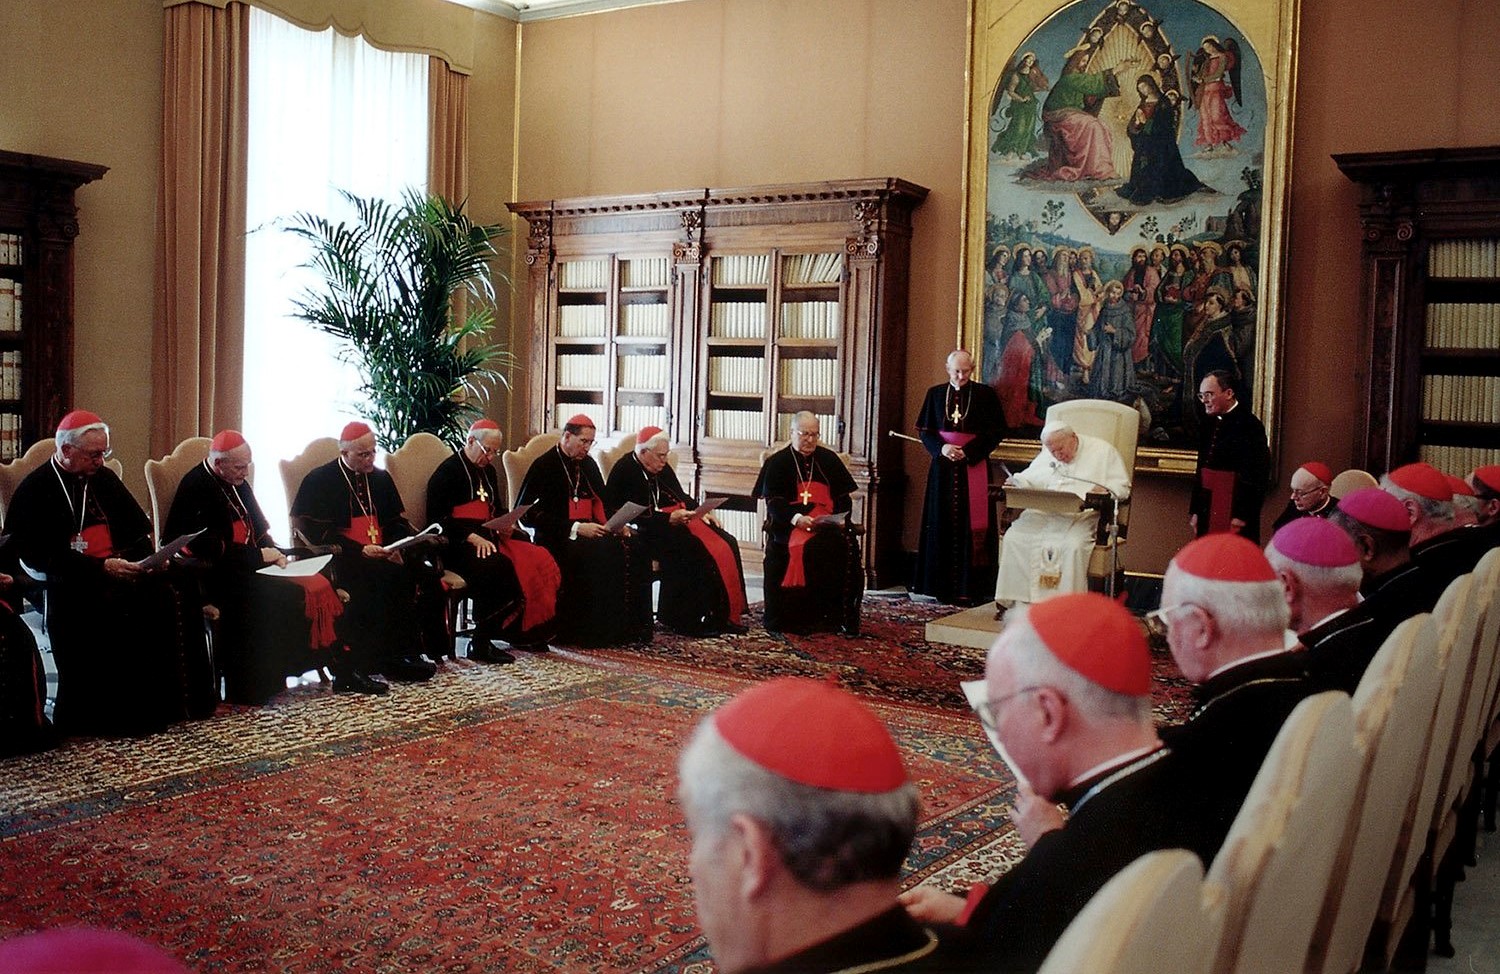 U.S. cardinals listen as Pope John Paul II addresses the special summit on clergy sexual abuse at the Vatican April 23, 2002. Cardinal Angelo Sodano, then Vatican secretary of state, is seated facing left of the pope. (CNS/Vatican Media)